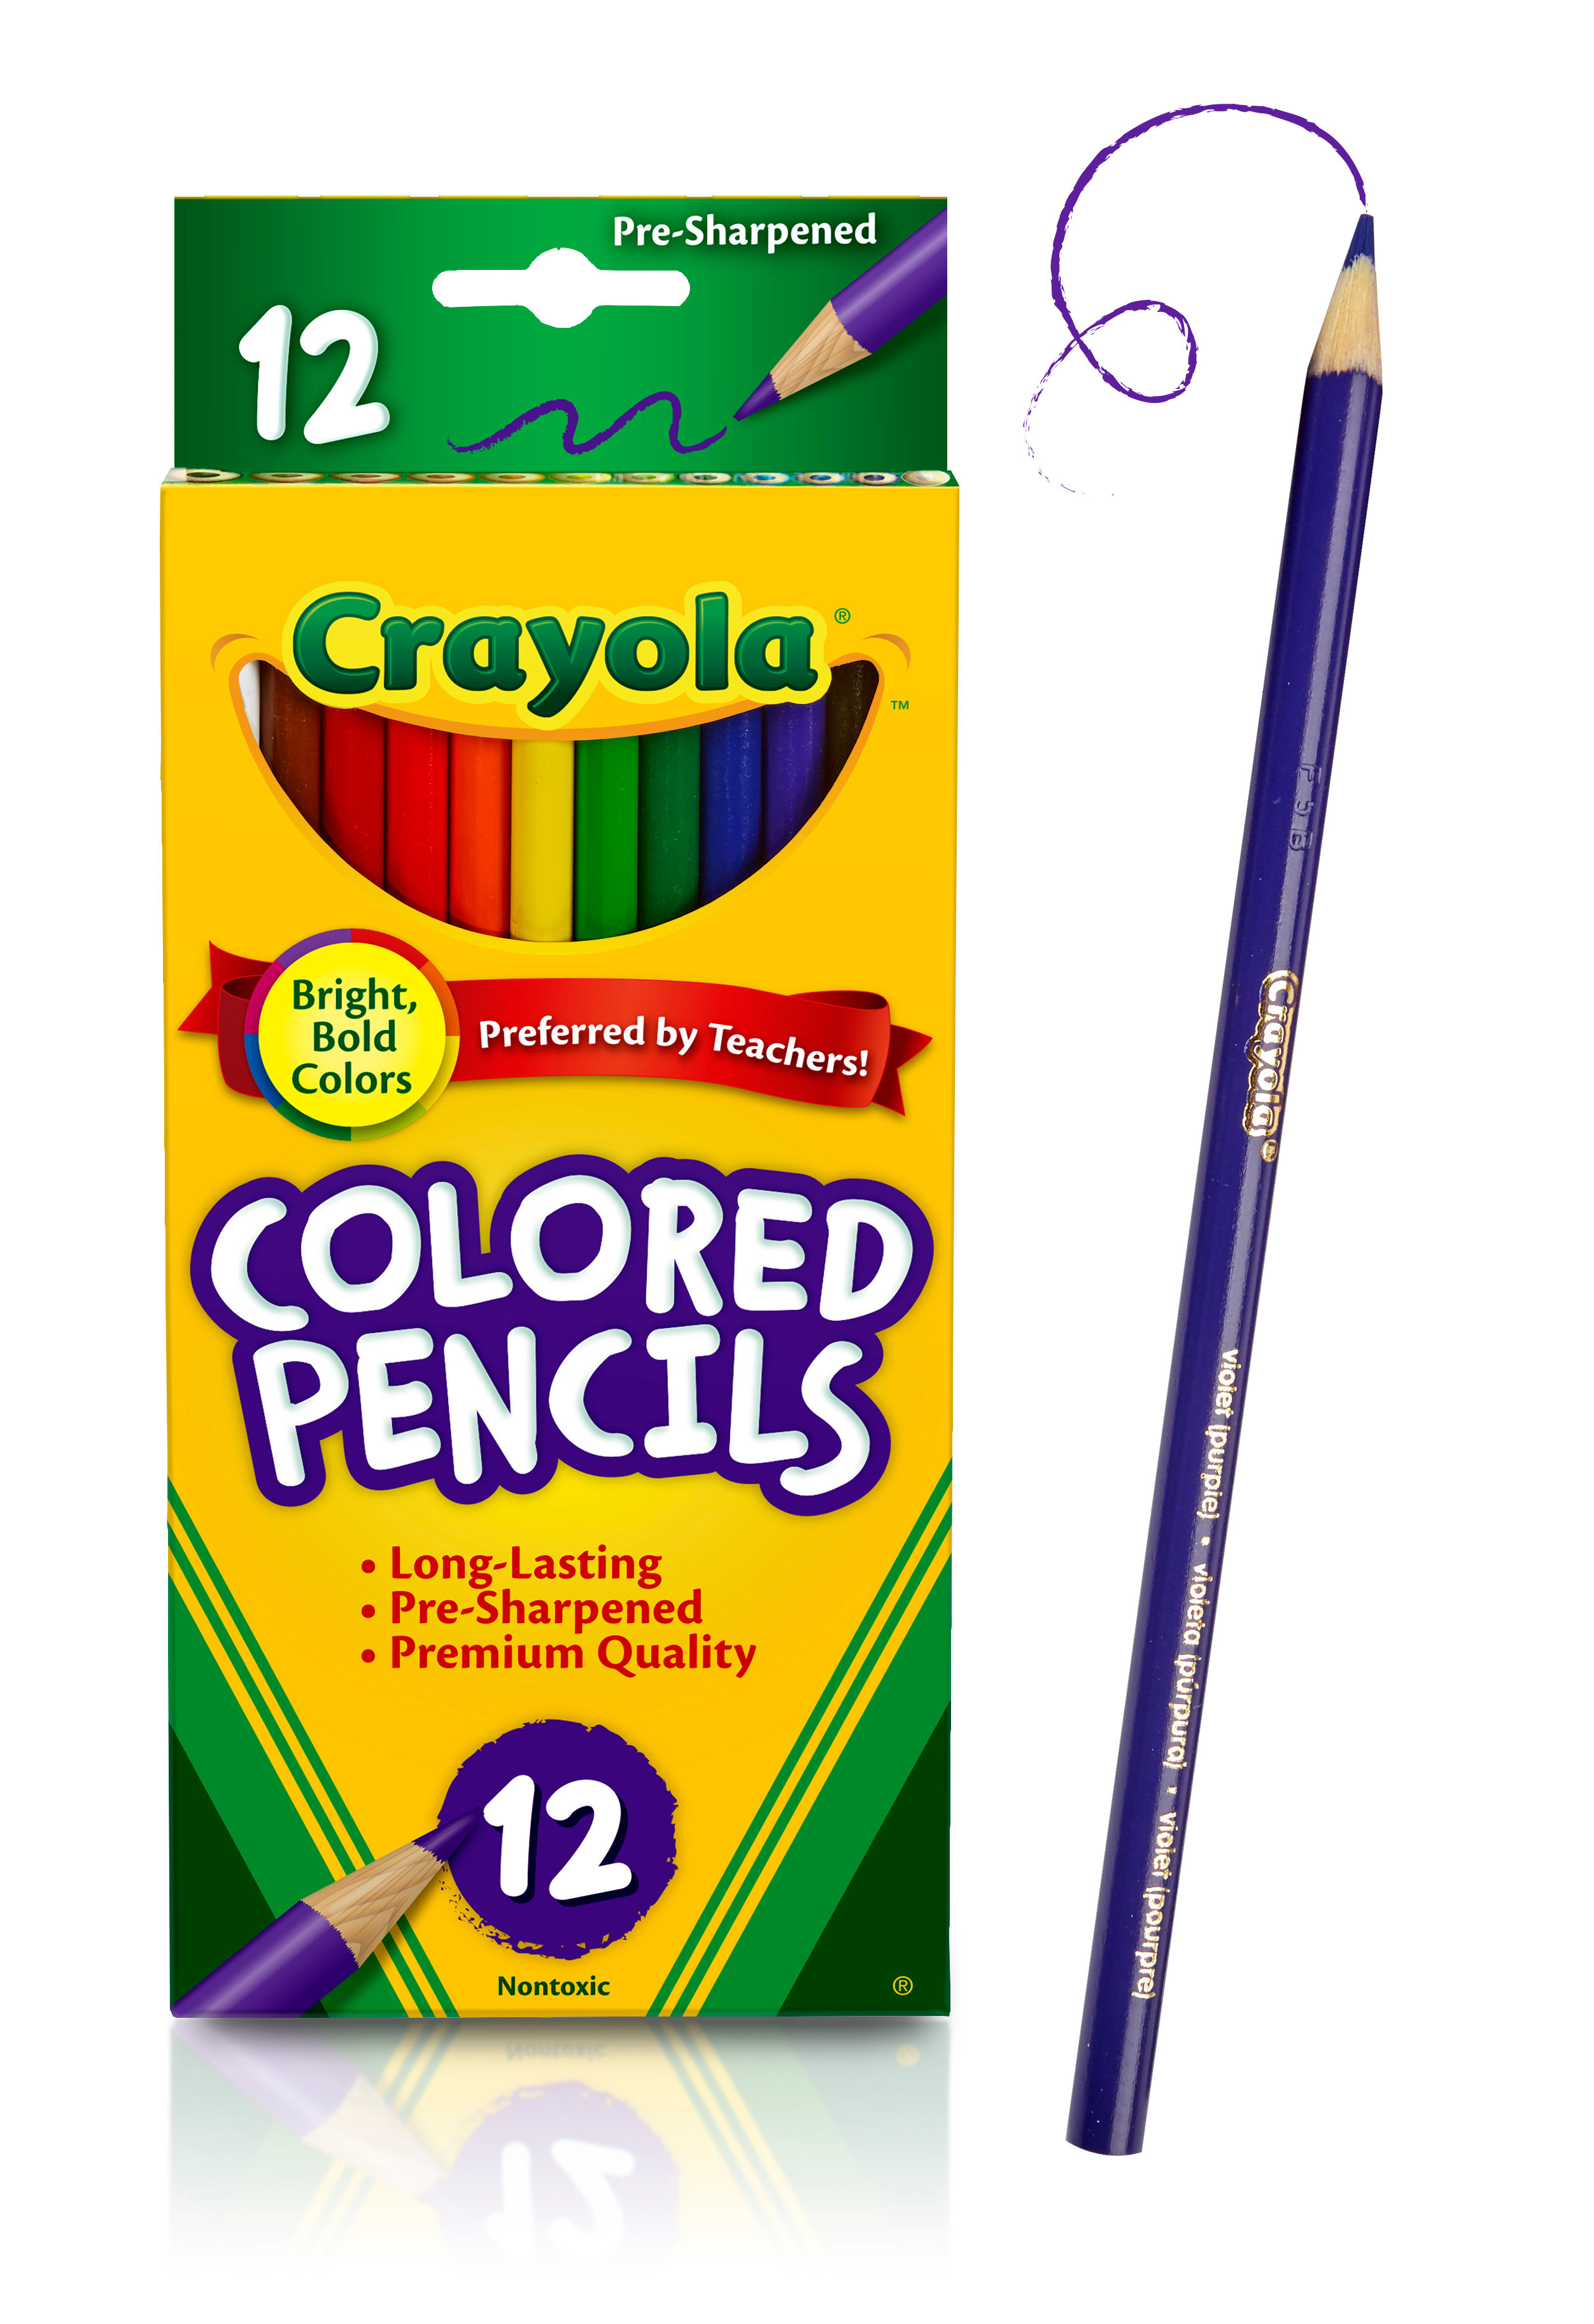 Crayola Colored Pencils, Assorted Colors, Pre-sharpened, Adult Coloring, 12 Count - image 4 of 7